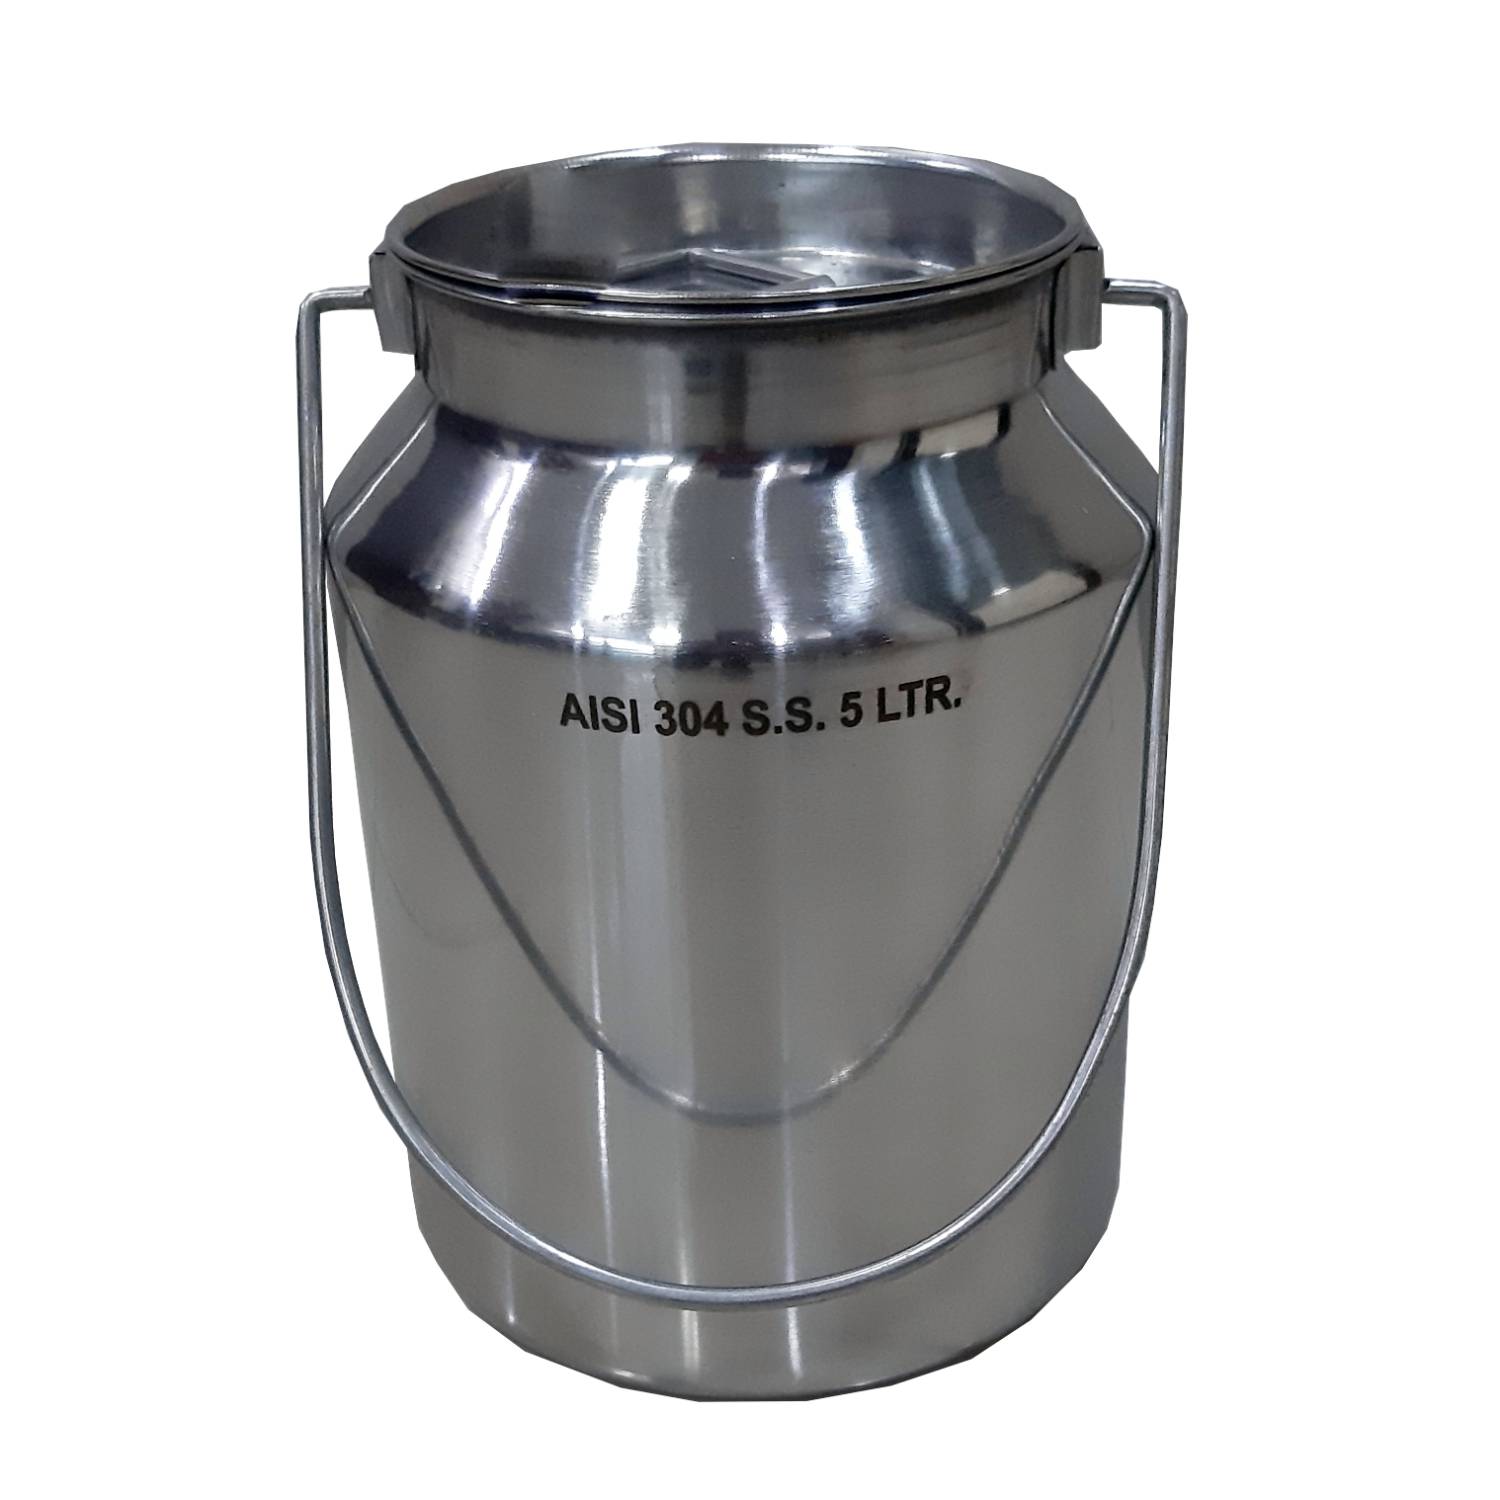 Small Shining Stainless Steel Milk Can Seamless Solid Bail 10 High 1.3 Gallon